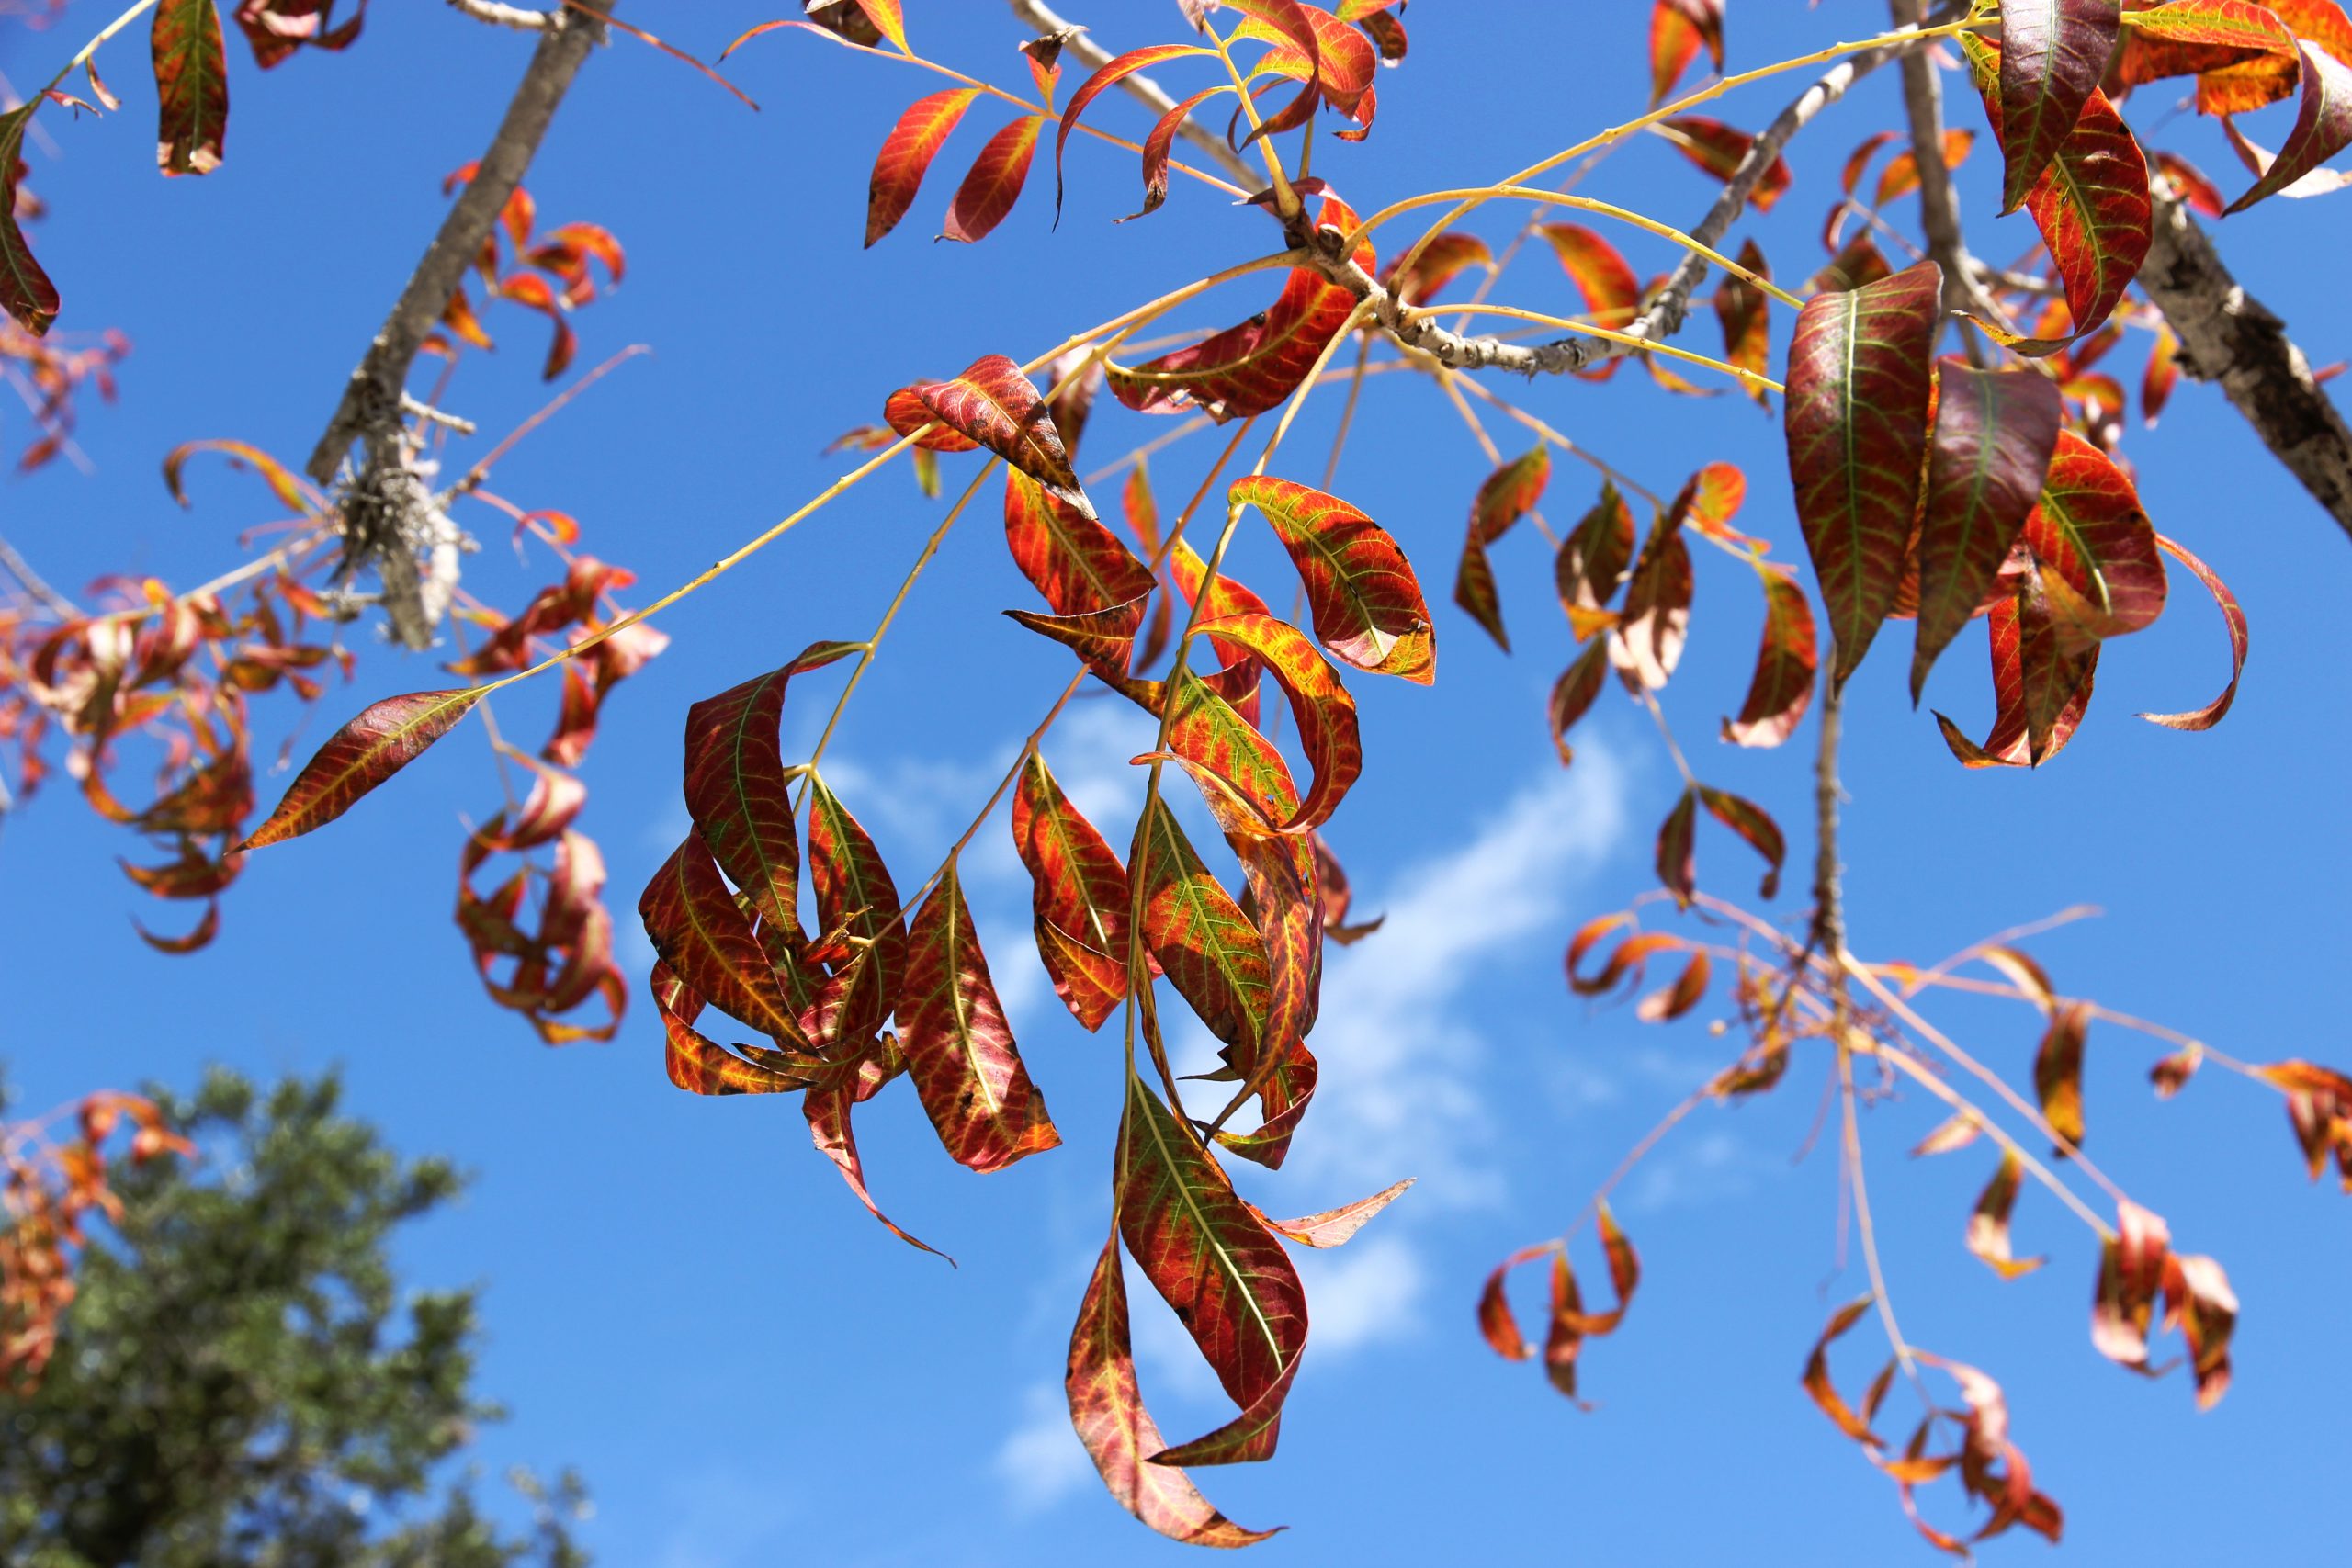 Fall leaves against a blue sky.